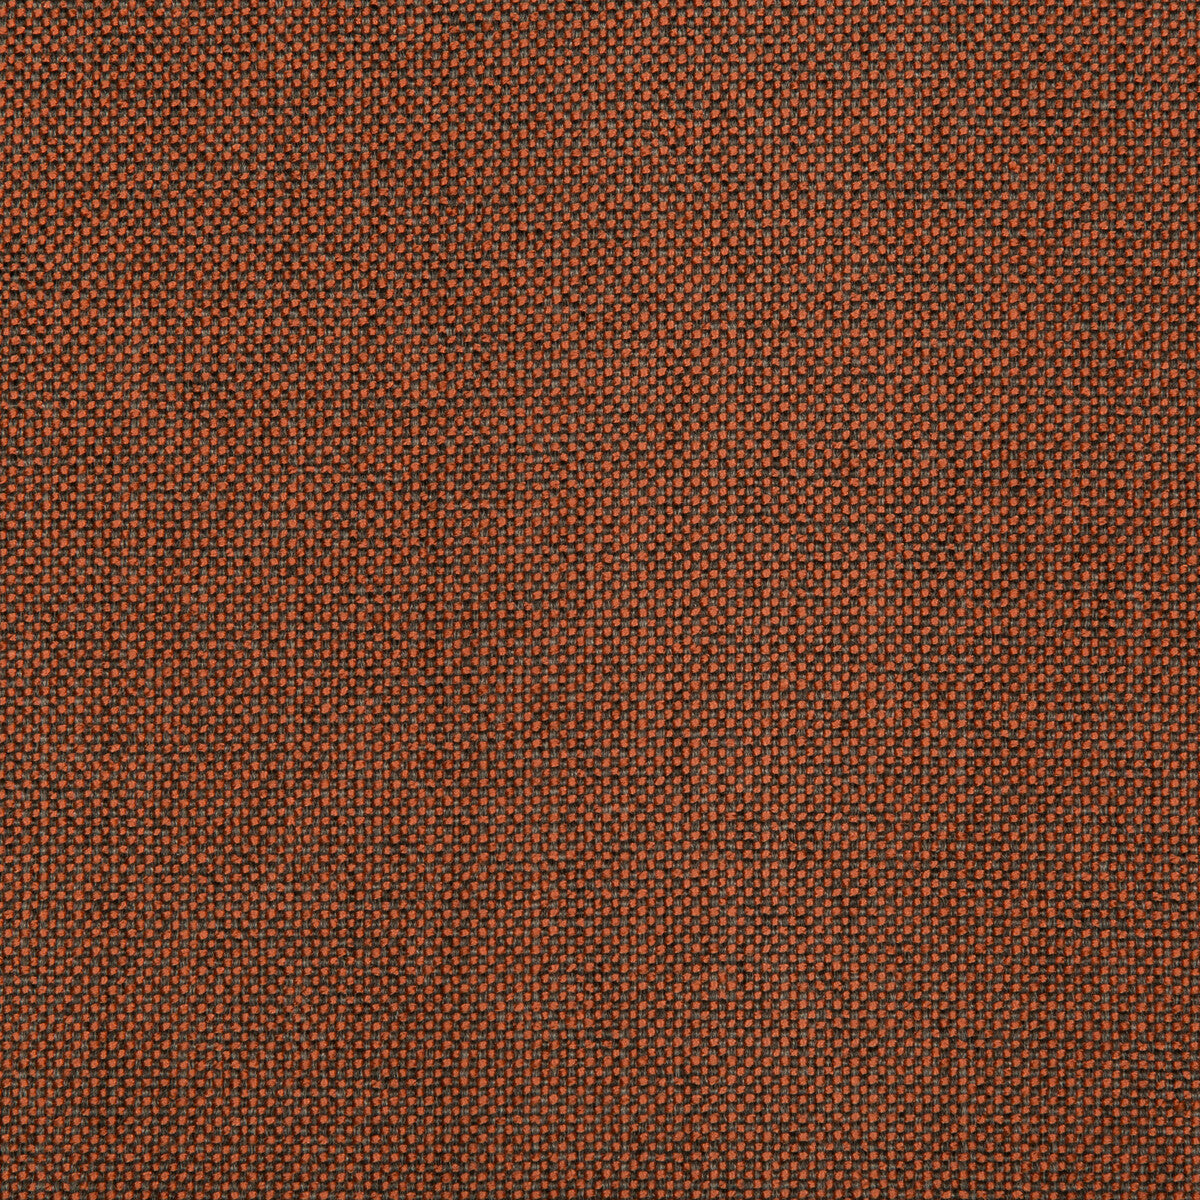 Williams fabric in spice color - pattern 35744.24.0 - by Kravet Contract in the Value Kravetarmor collection